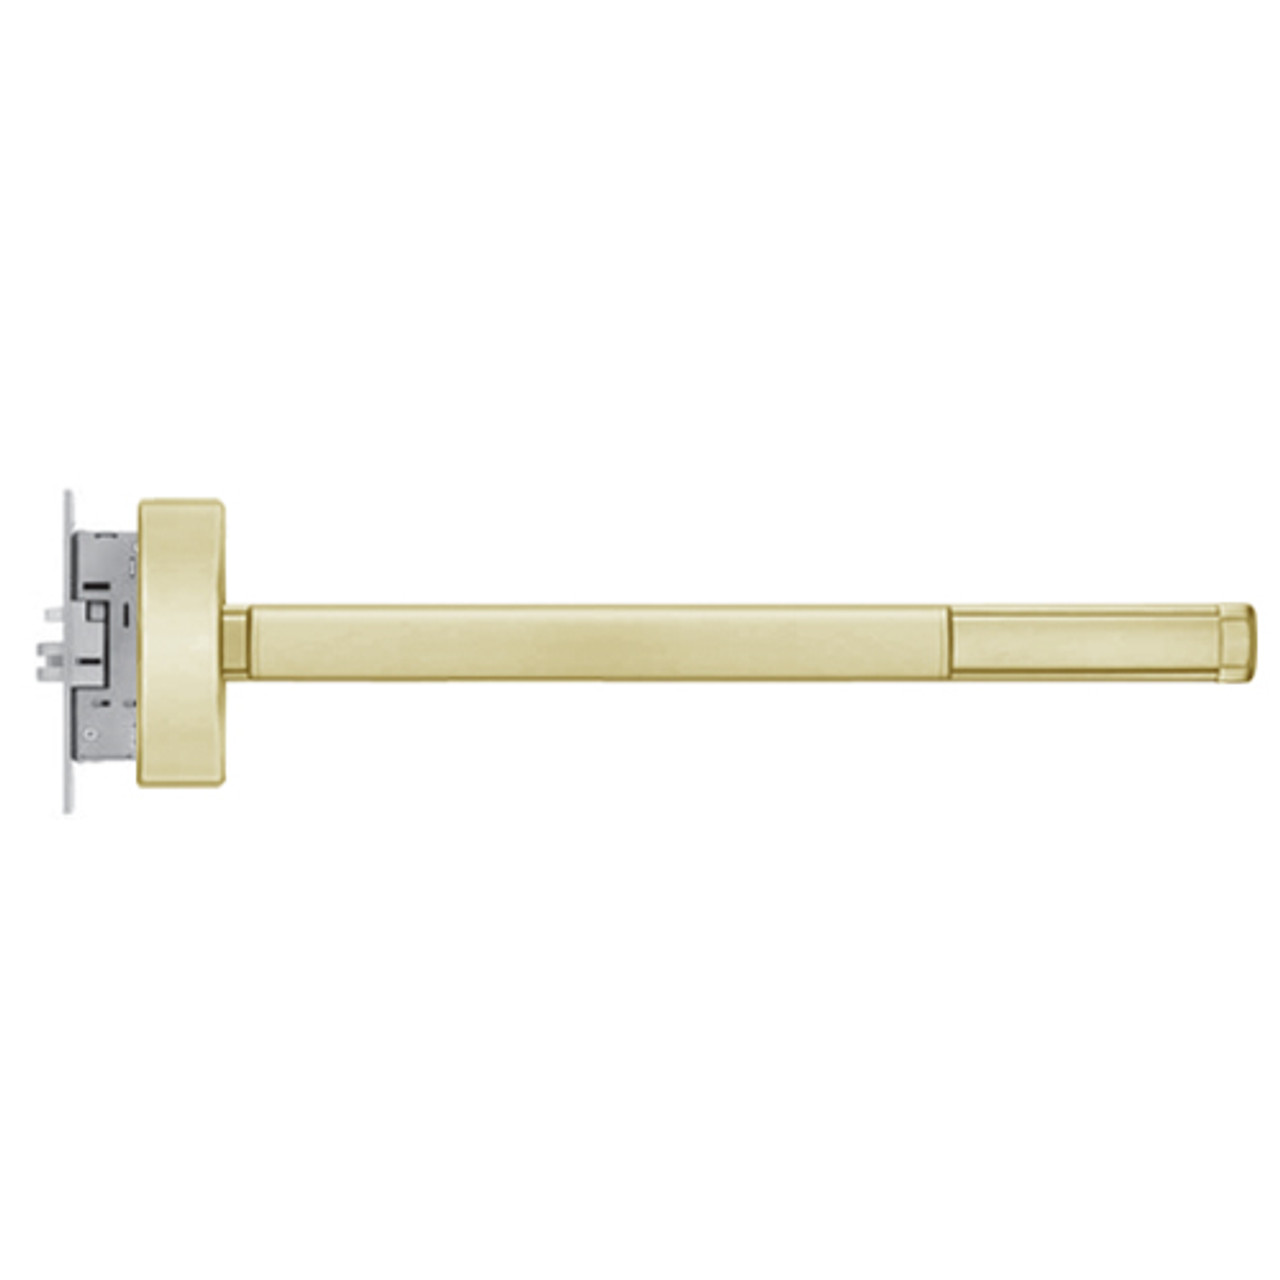 2308-RHR-606-36 PHI 2300 Series Non Fire Rated Apex Mortise Exit Device Prepped for Key Controls Lever/Knob in Satin Brass Finish